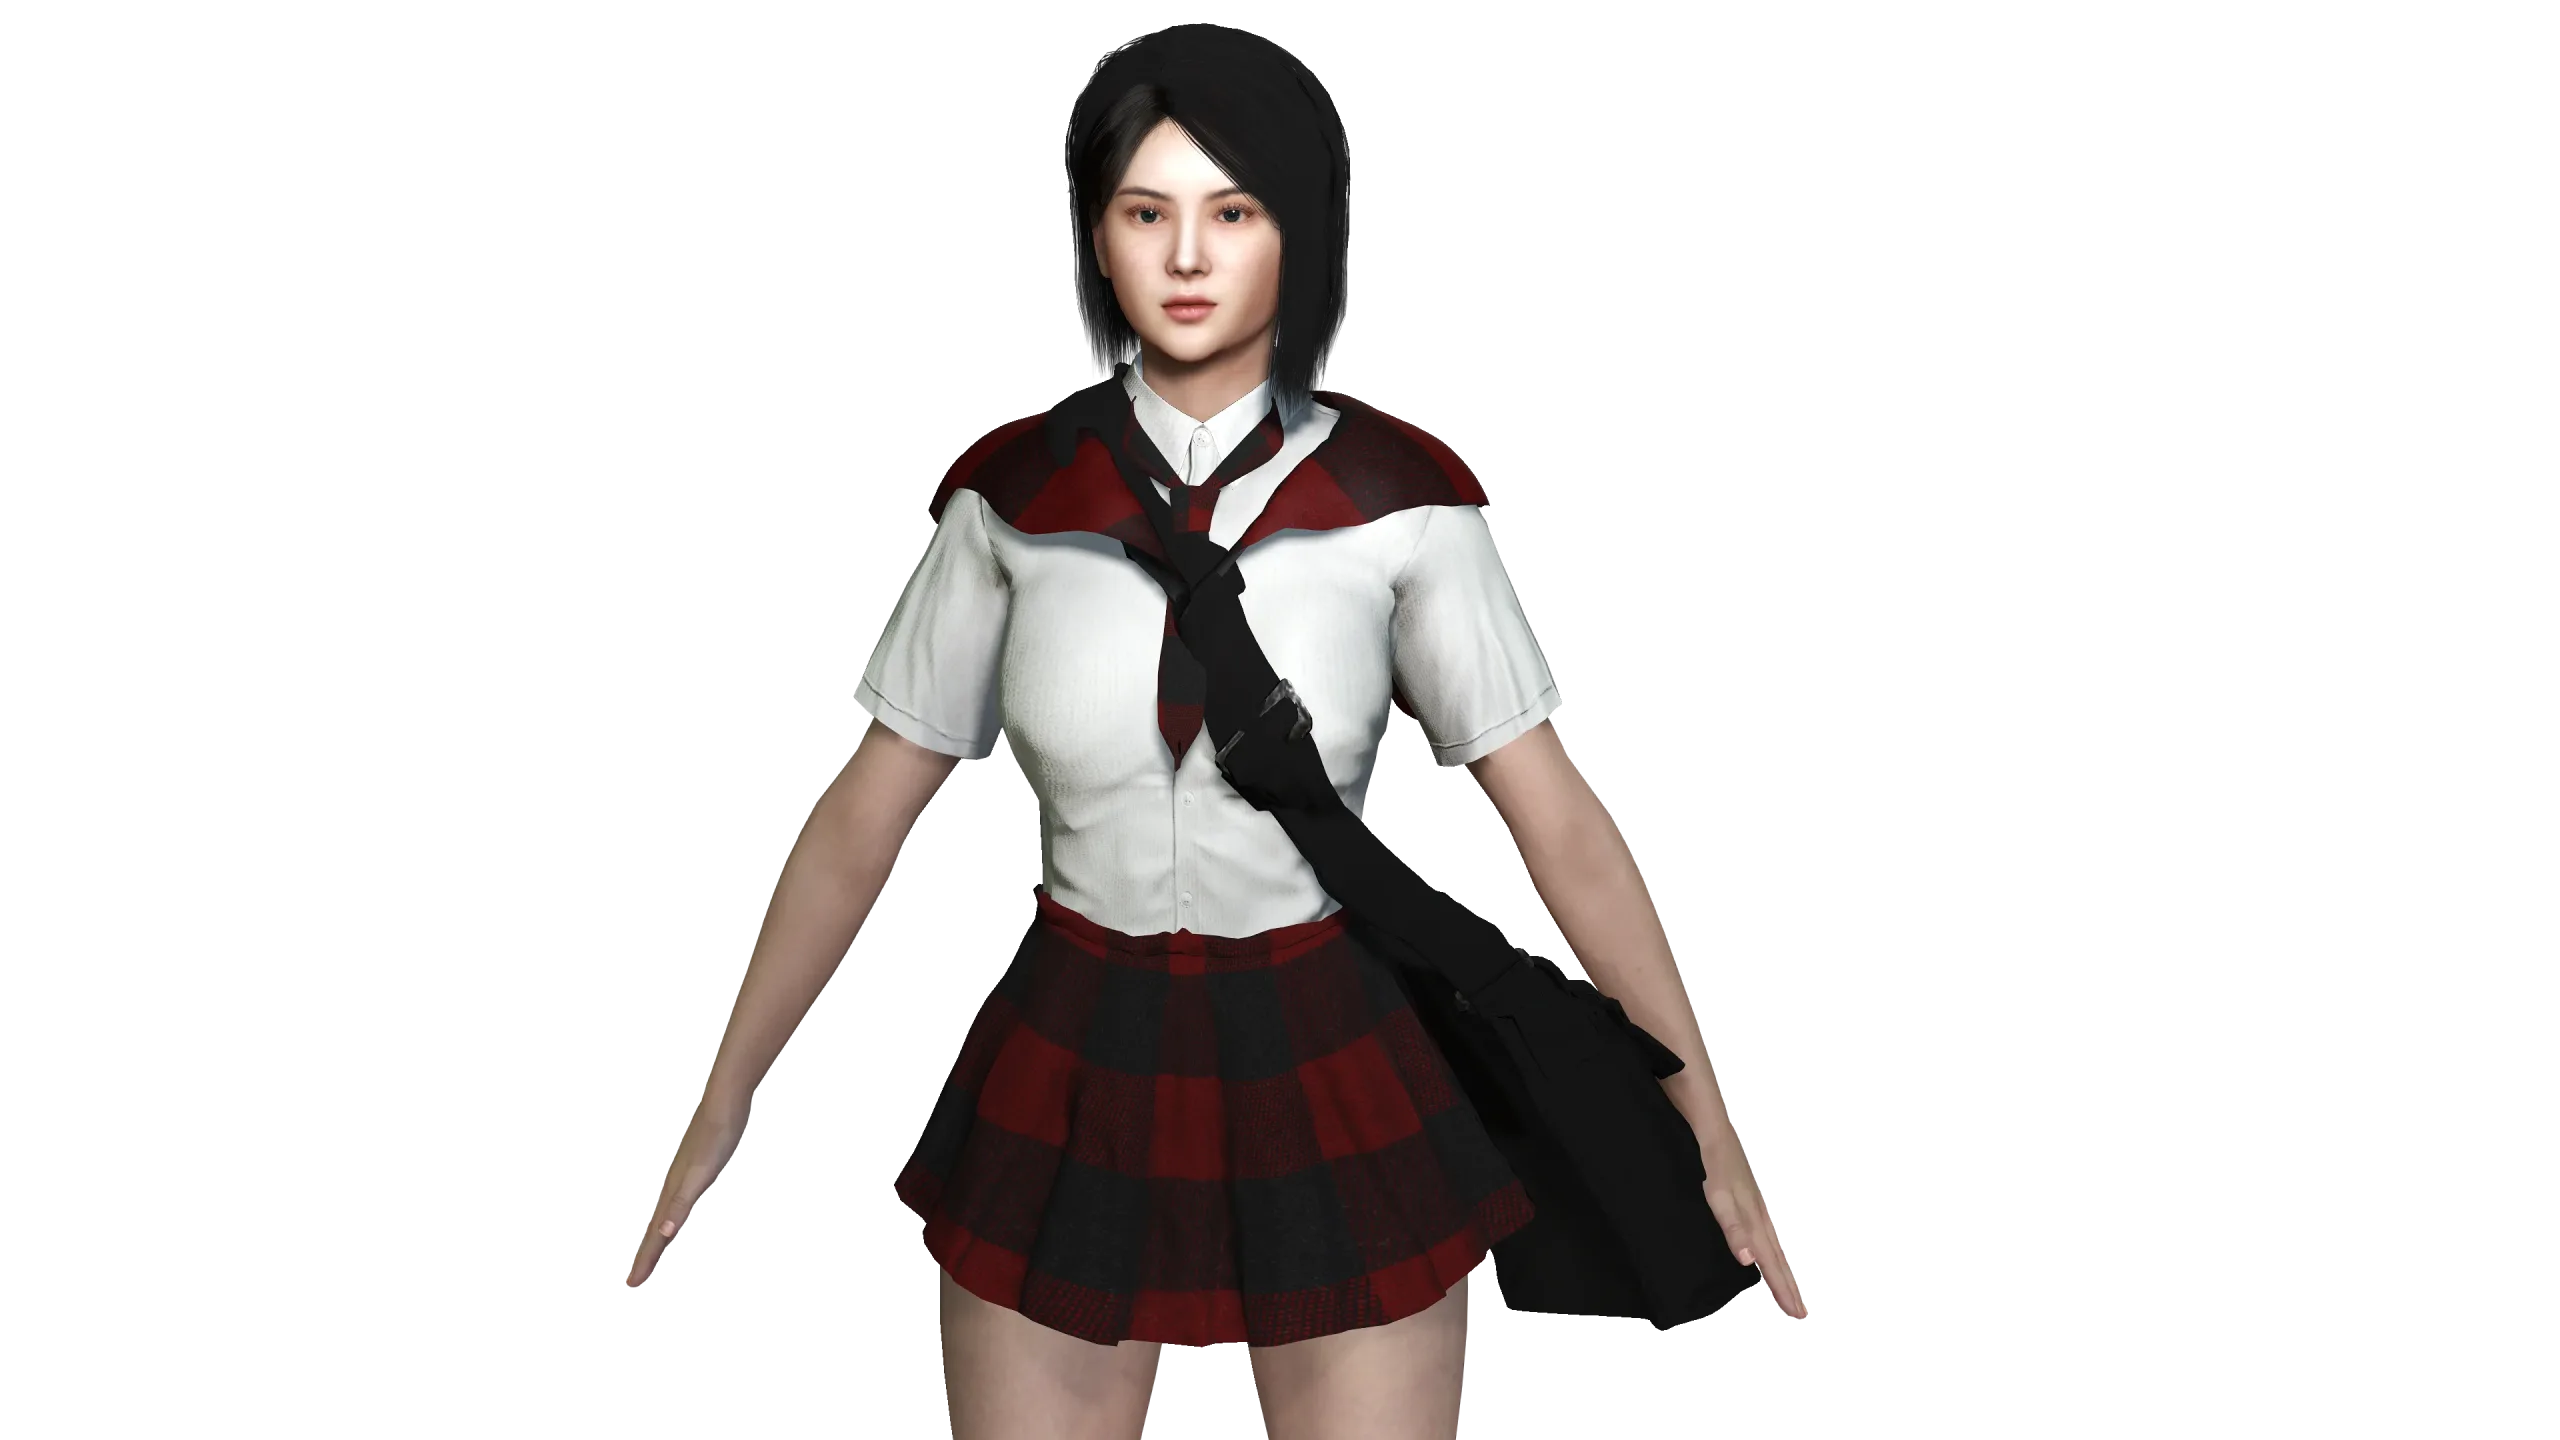 AAA 3D ASIAN SCHOOL GIRL - REALISTIC GAME READY CHARACTER